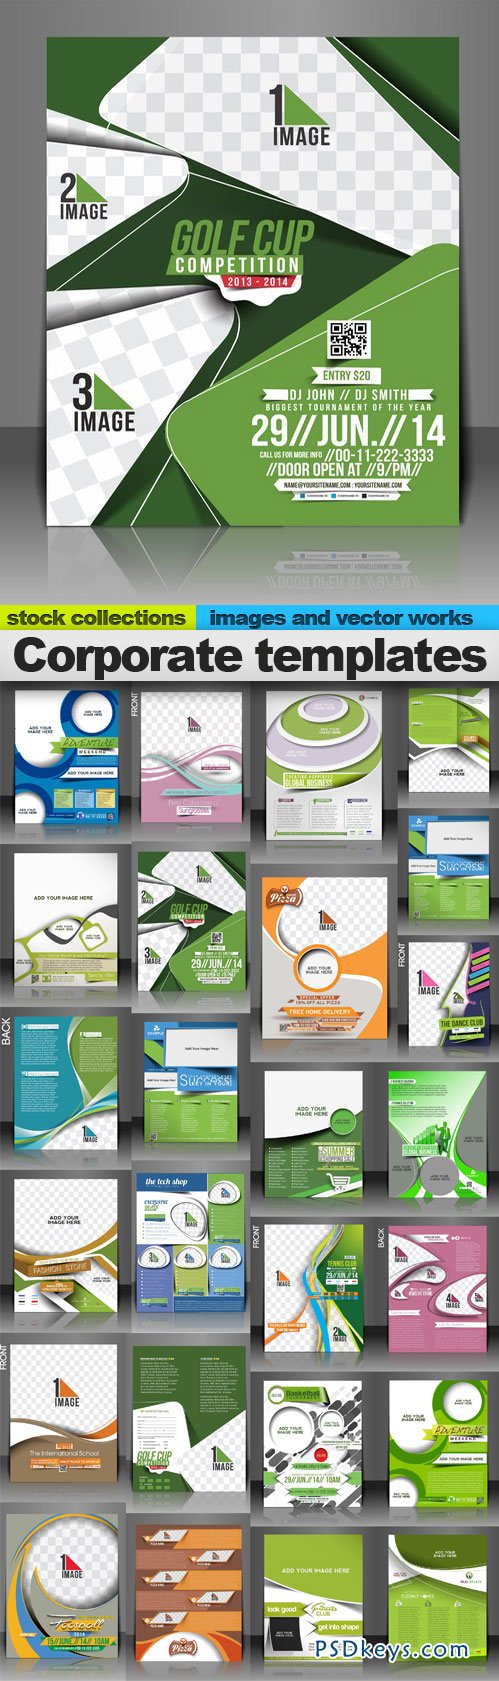 Corporate templates 25xEPS